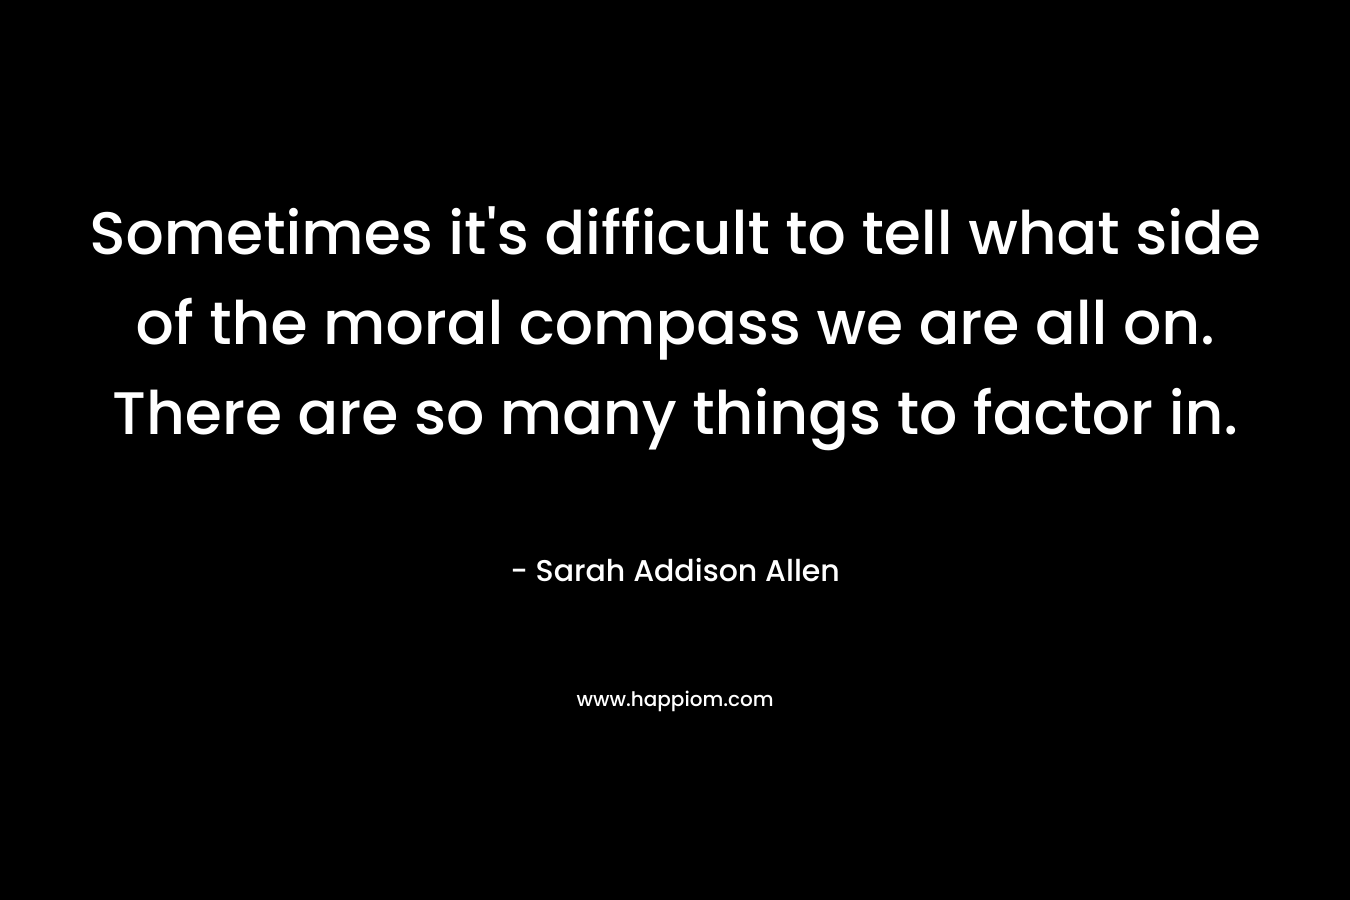 Sometimes it's difficult to tell what side of the moral compass we are all on. There are so many things to factor in.